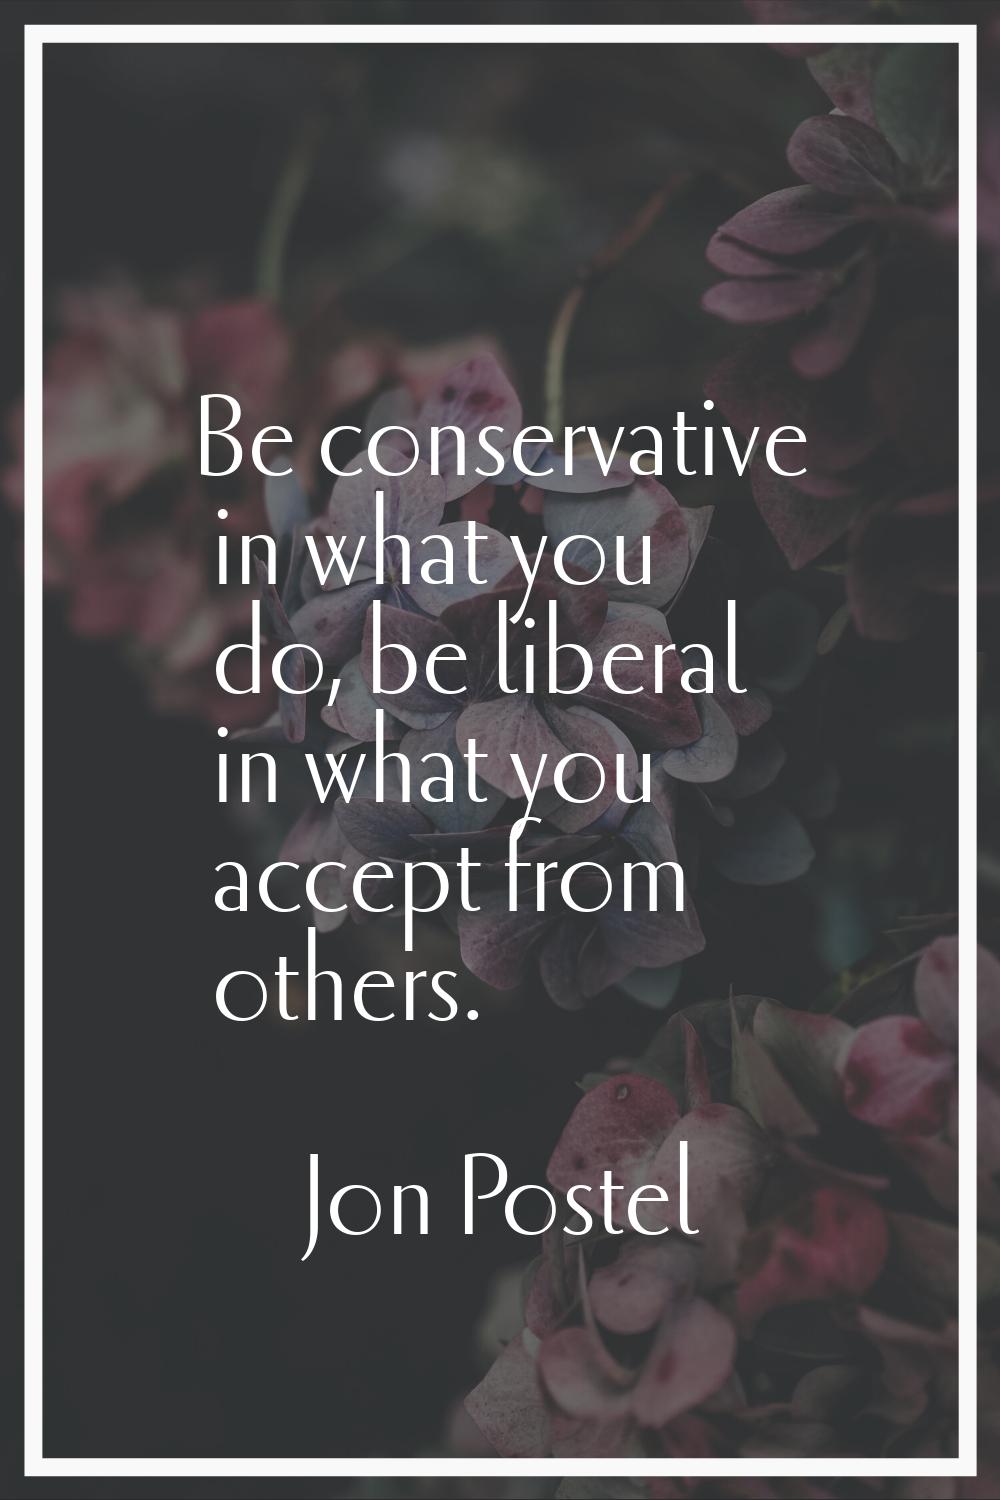 Be conservative in what you do, be liberal in what you accept from others.